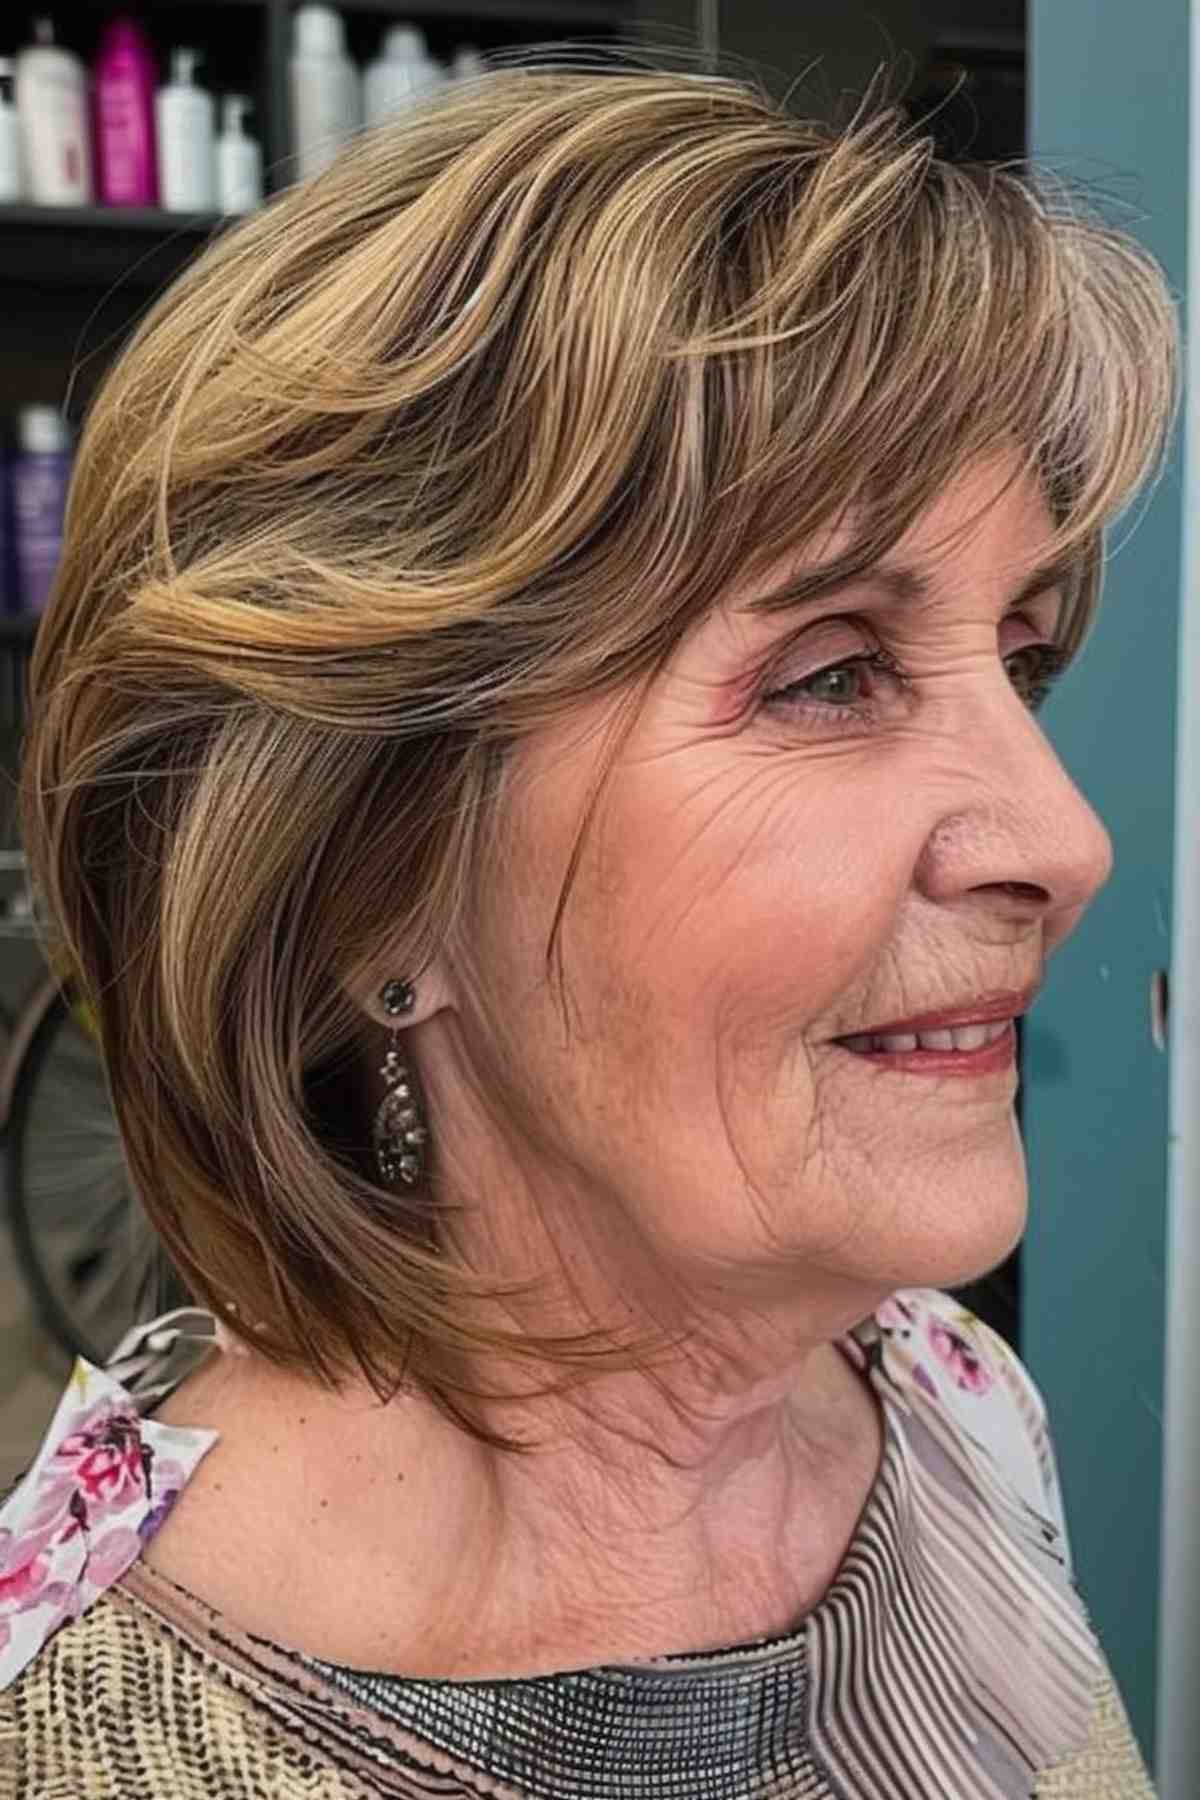 Mature woman with fine, highlighted hair and side-swept bangs for a voluminous appearance.